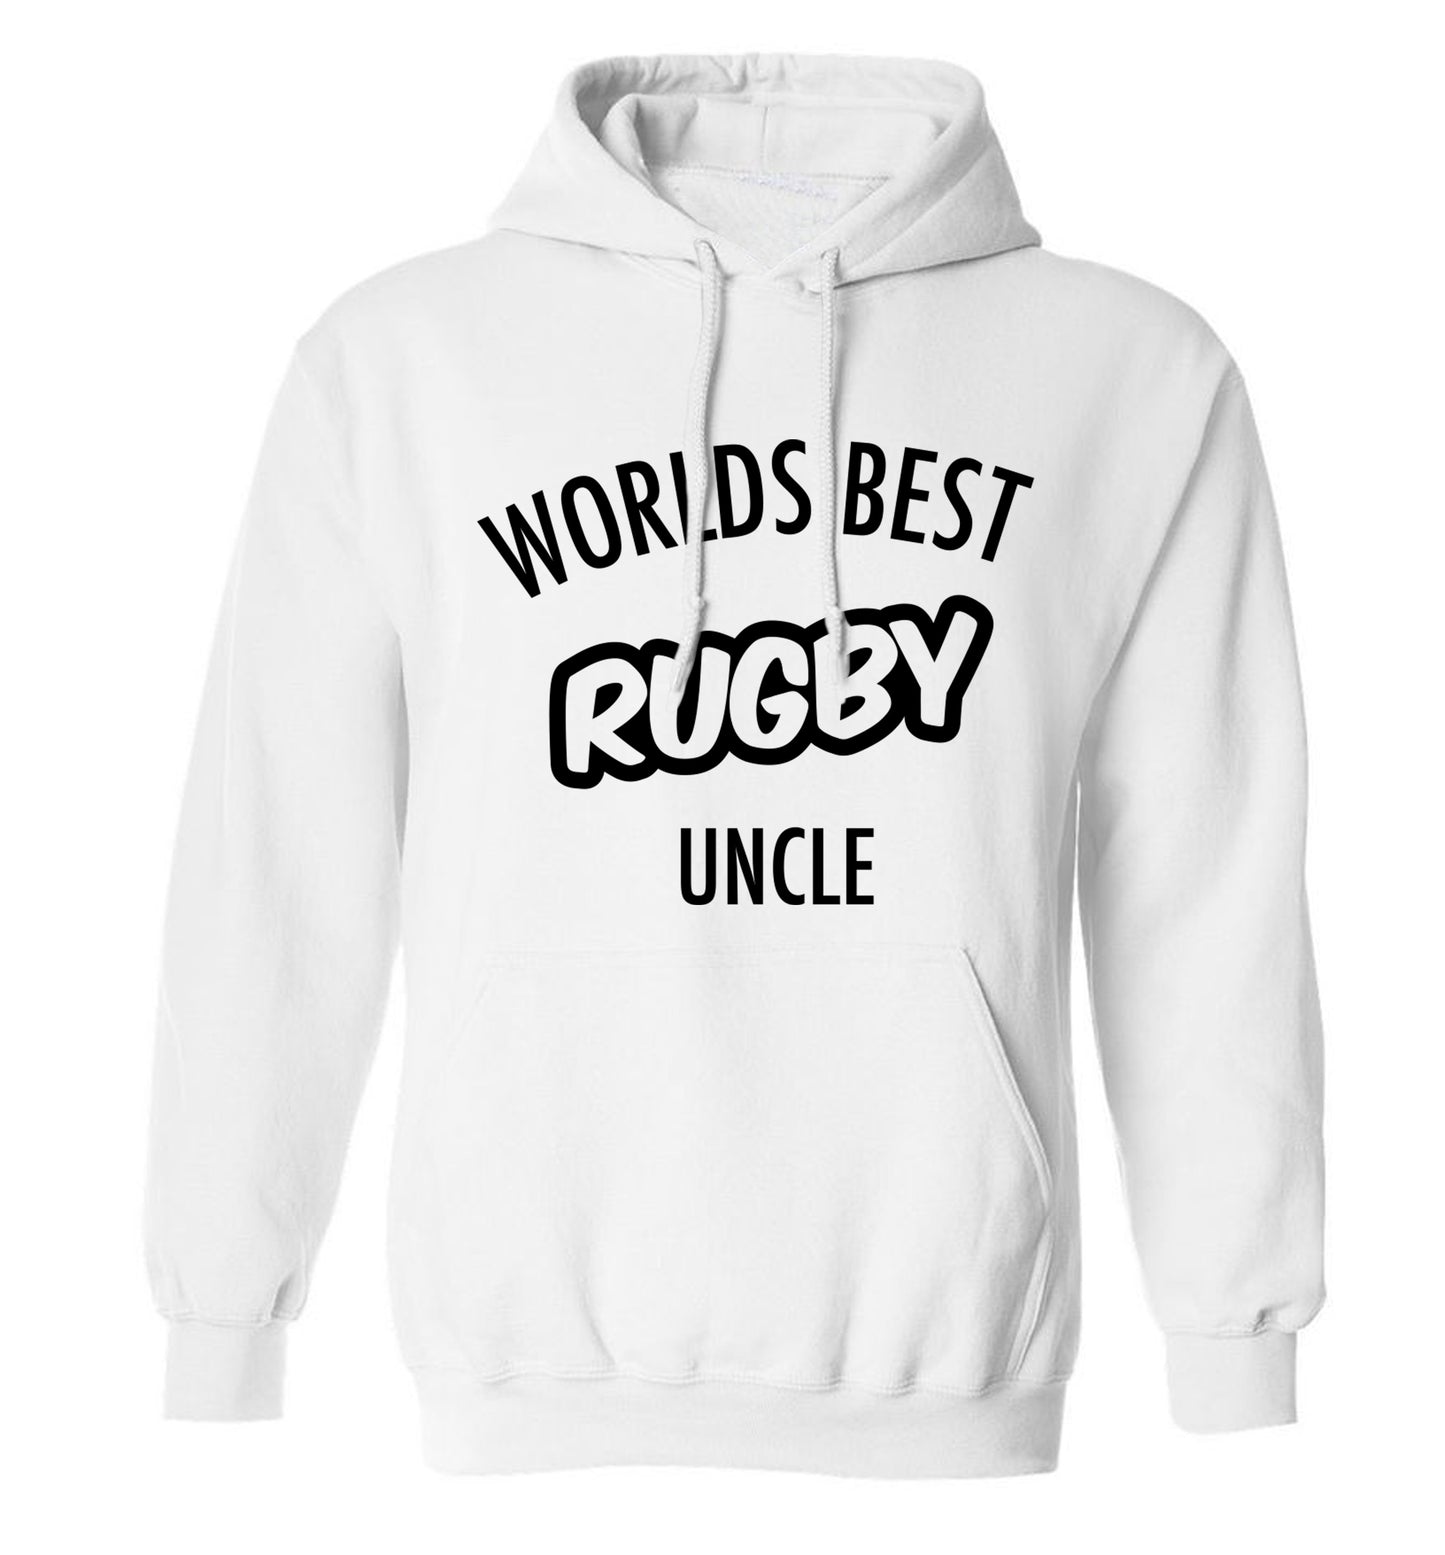 Worlds best rugby uncle adults unisex white hoodie 2XL